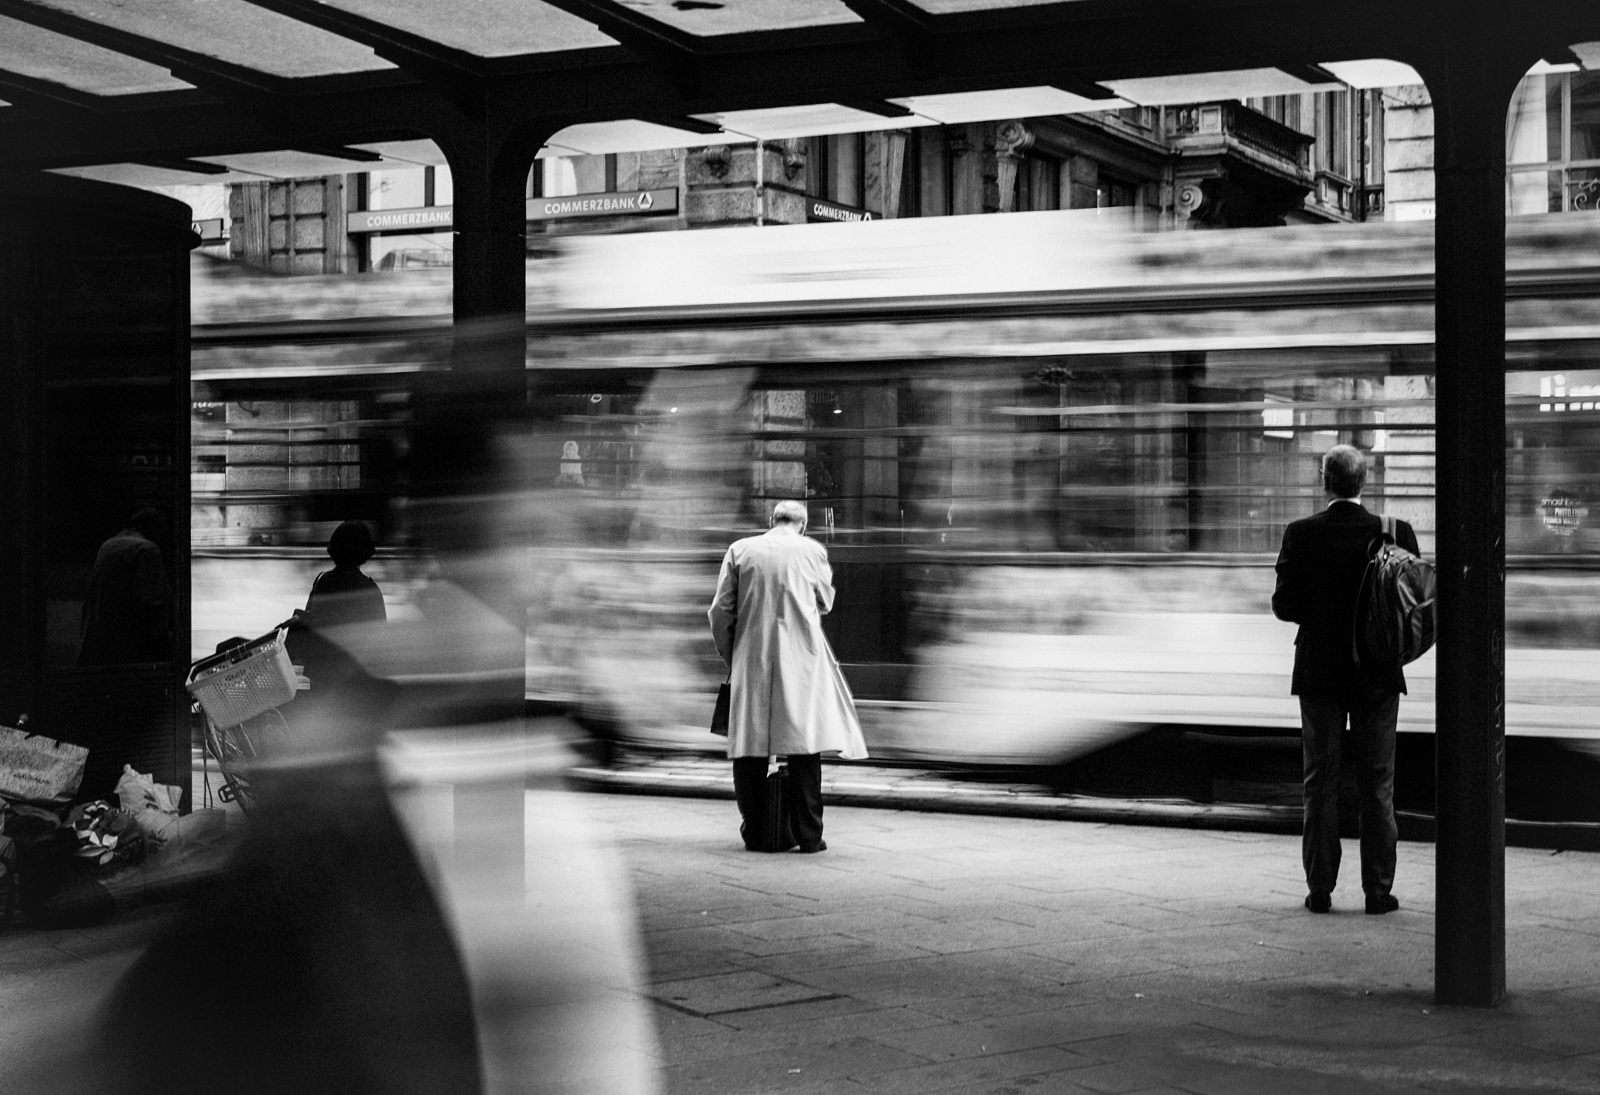 A Simple Secret to Better Street Photography